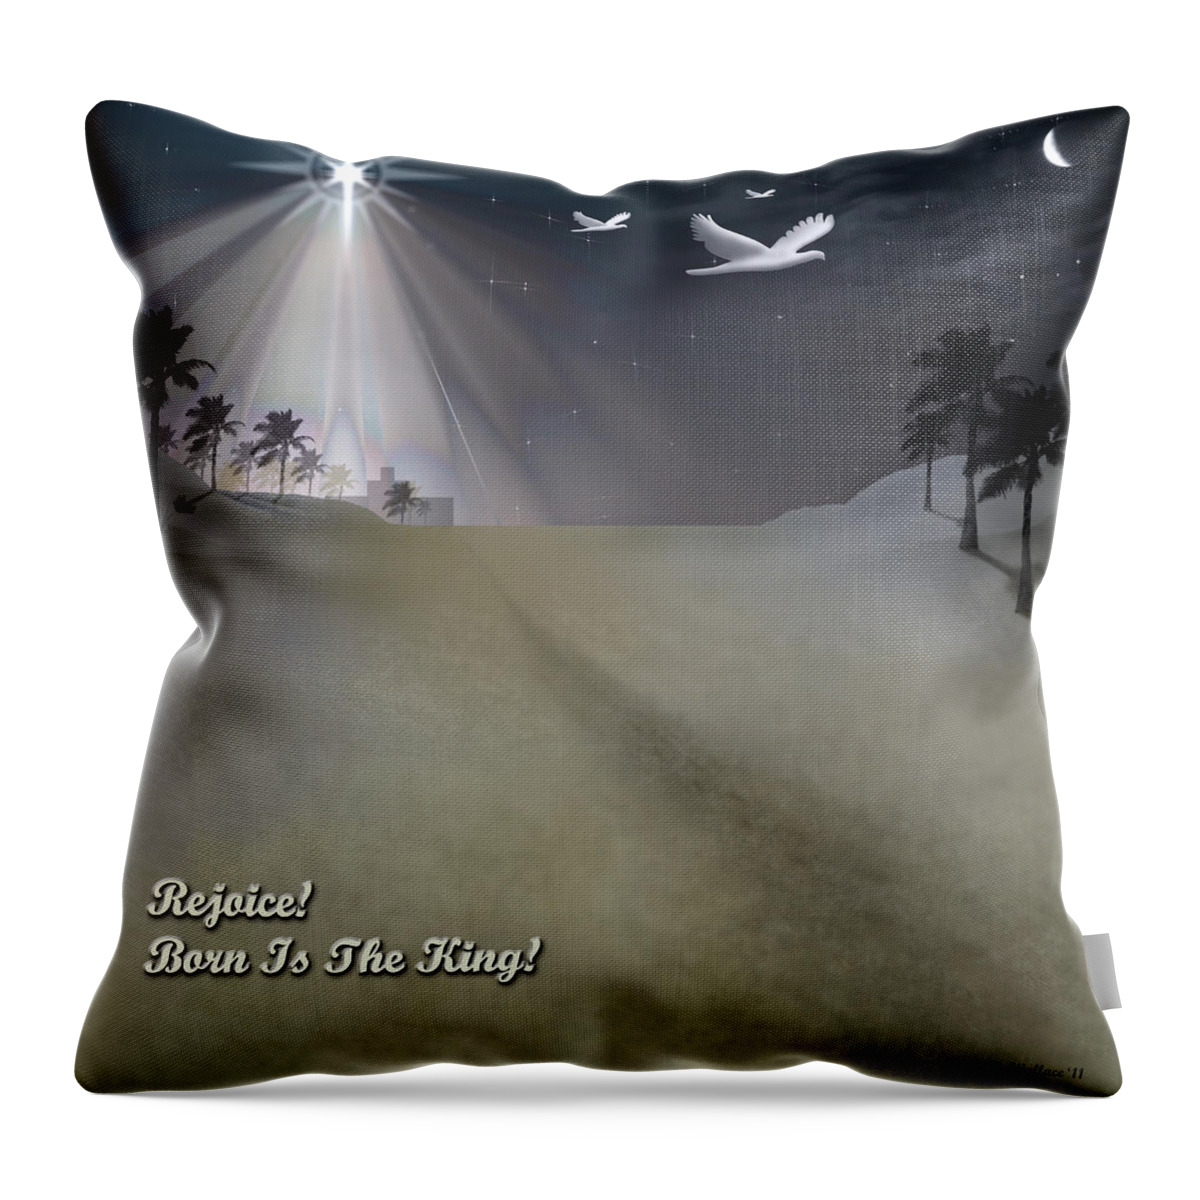 Brian Wallace Throw Pillow featuring the digital art Rejoice by Brian Wallace